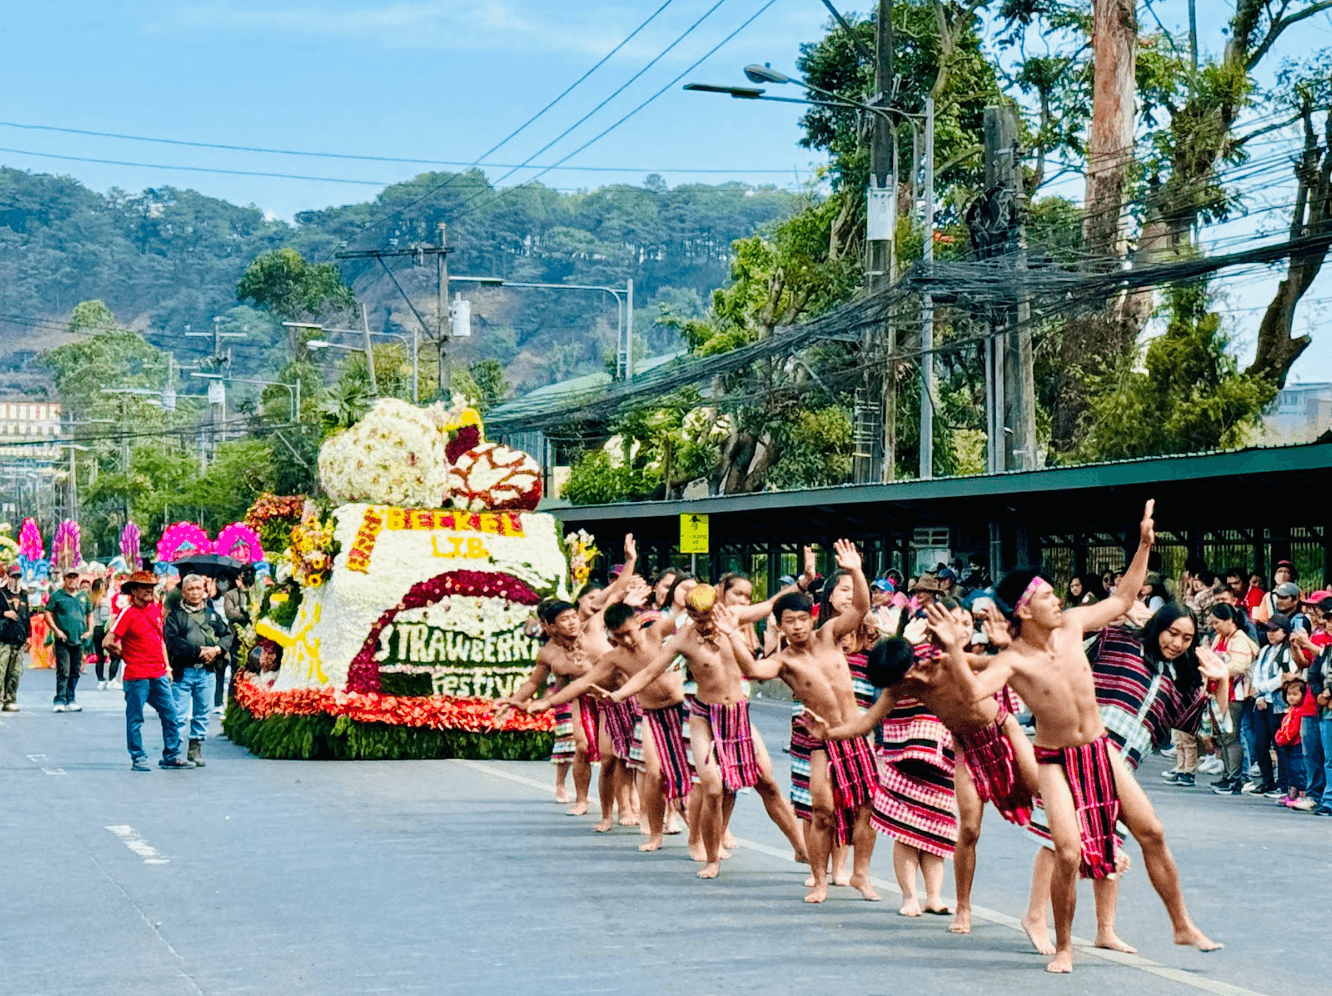 Berry spectacular! La Trinidad’s float parade shines at 42nd Strawberry Festival